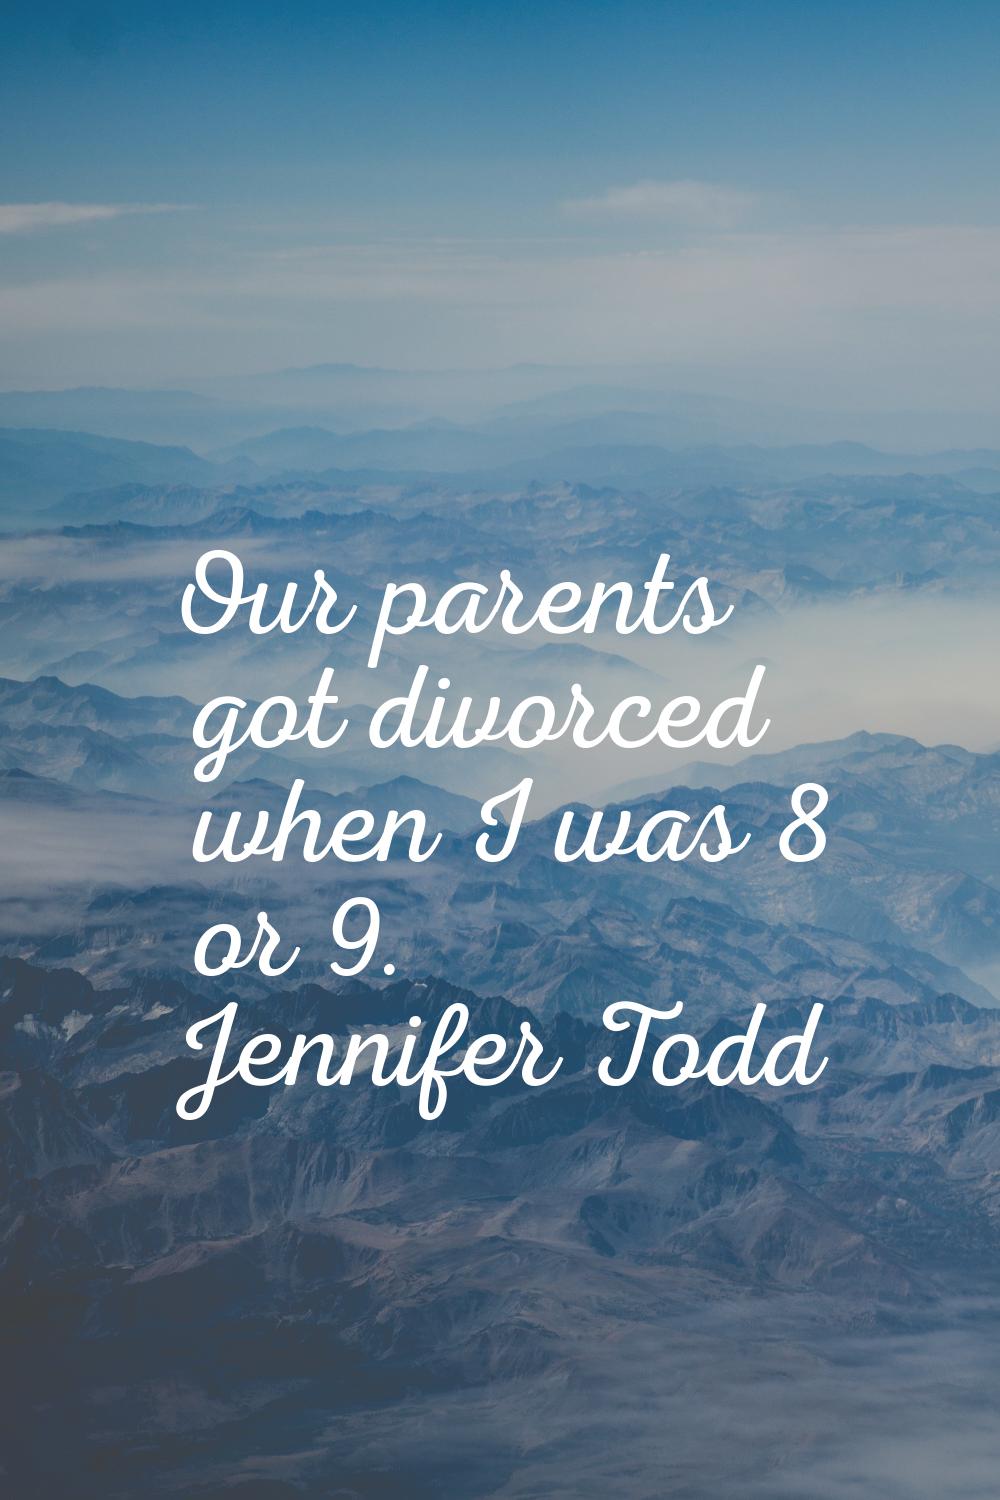 Our parents got divorced when I was 8 or 9.